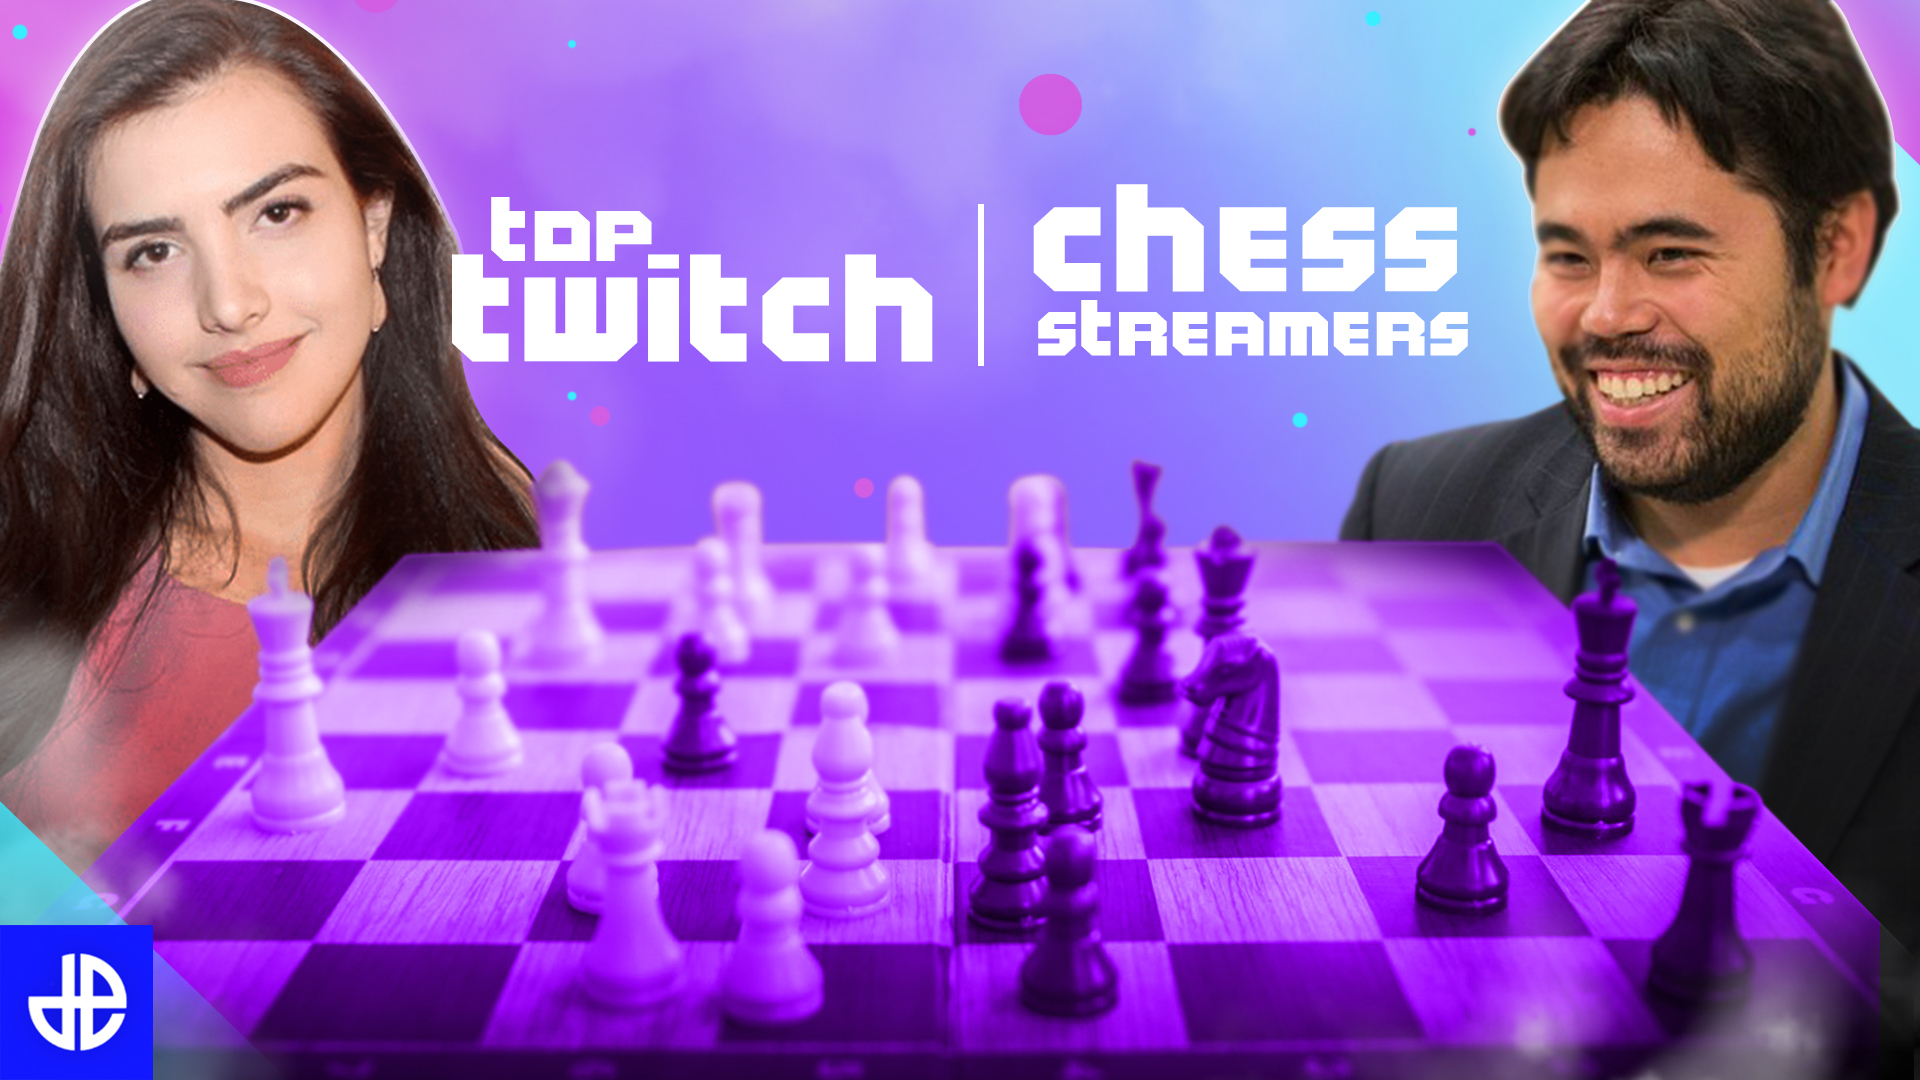 EASIEST way to gain rating in chess #botez #streamer #Twitch